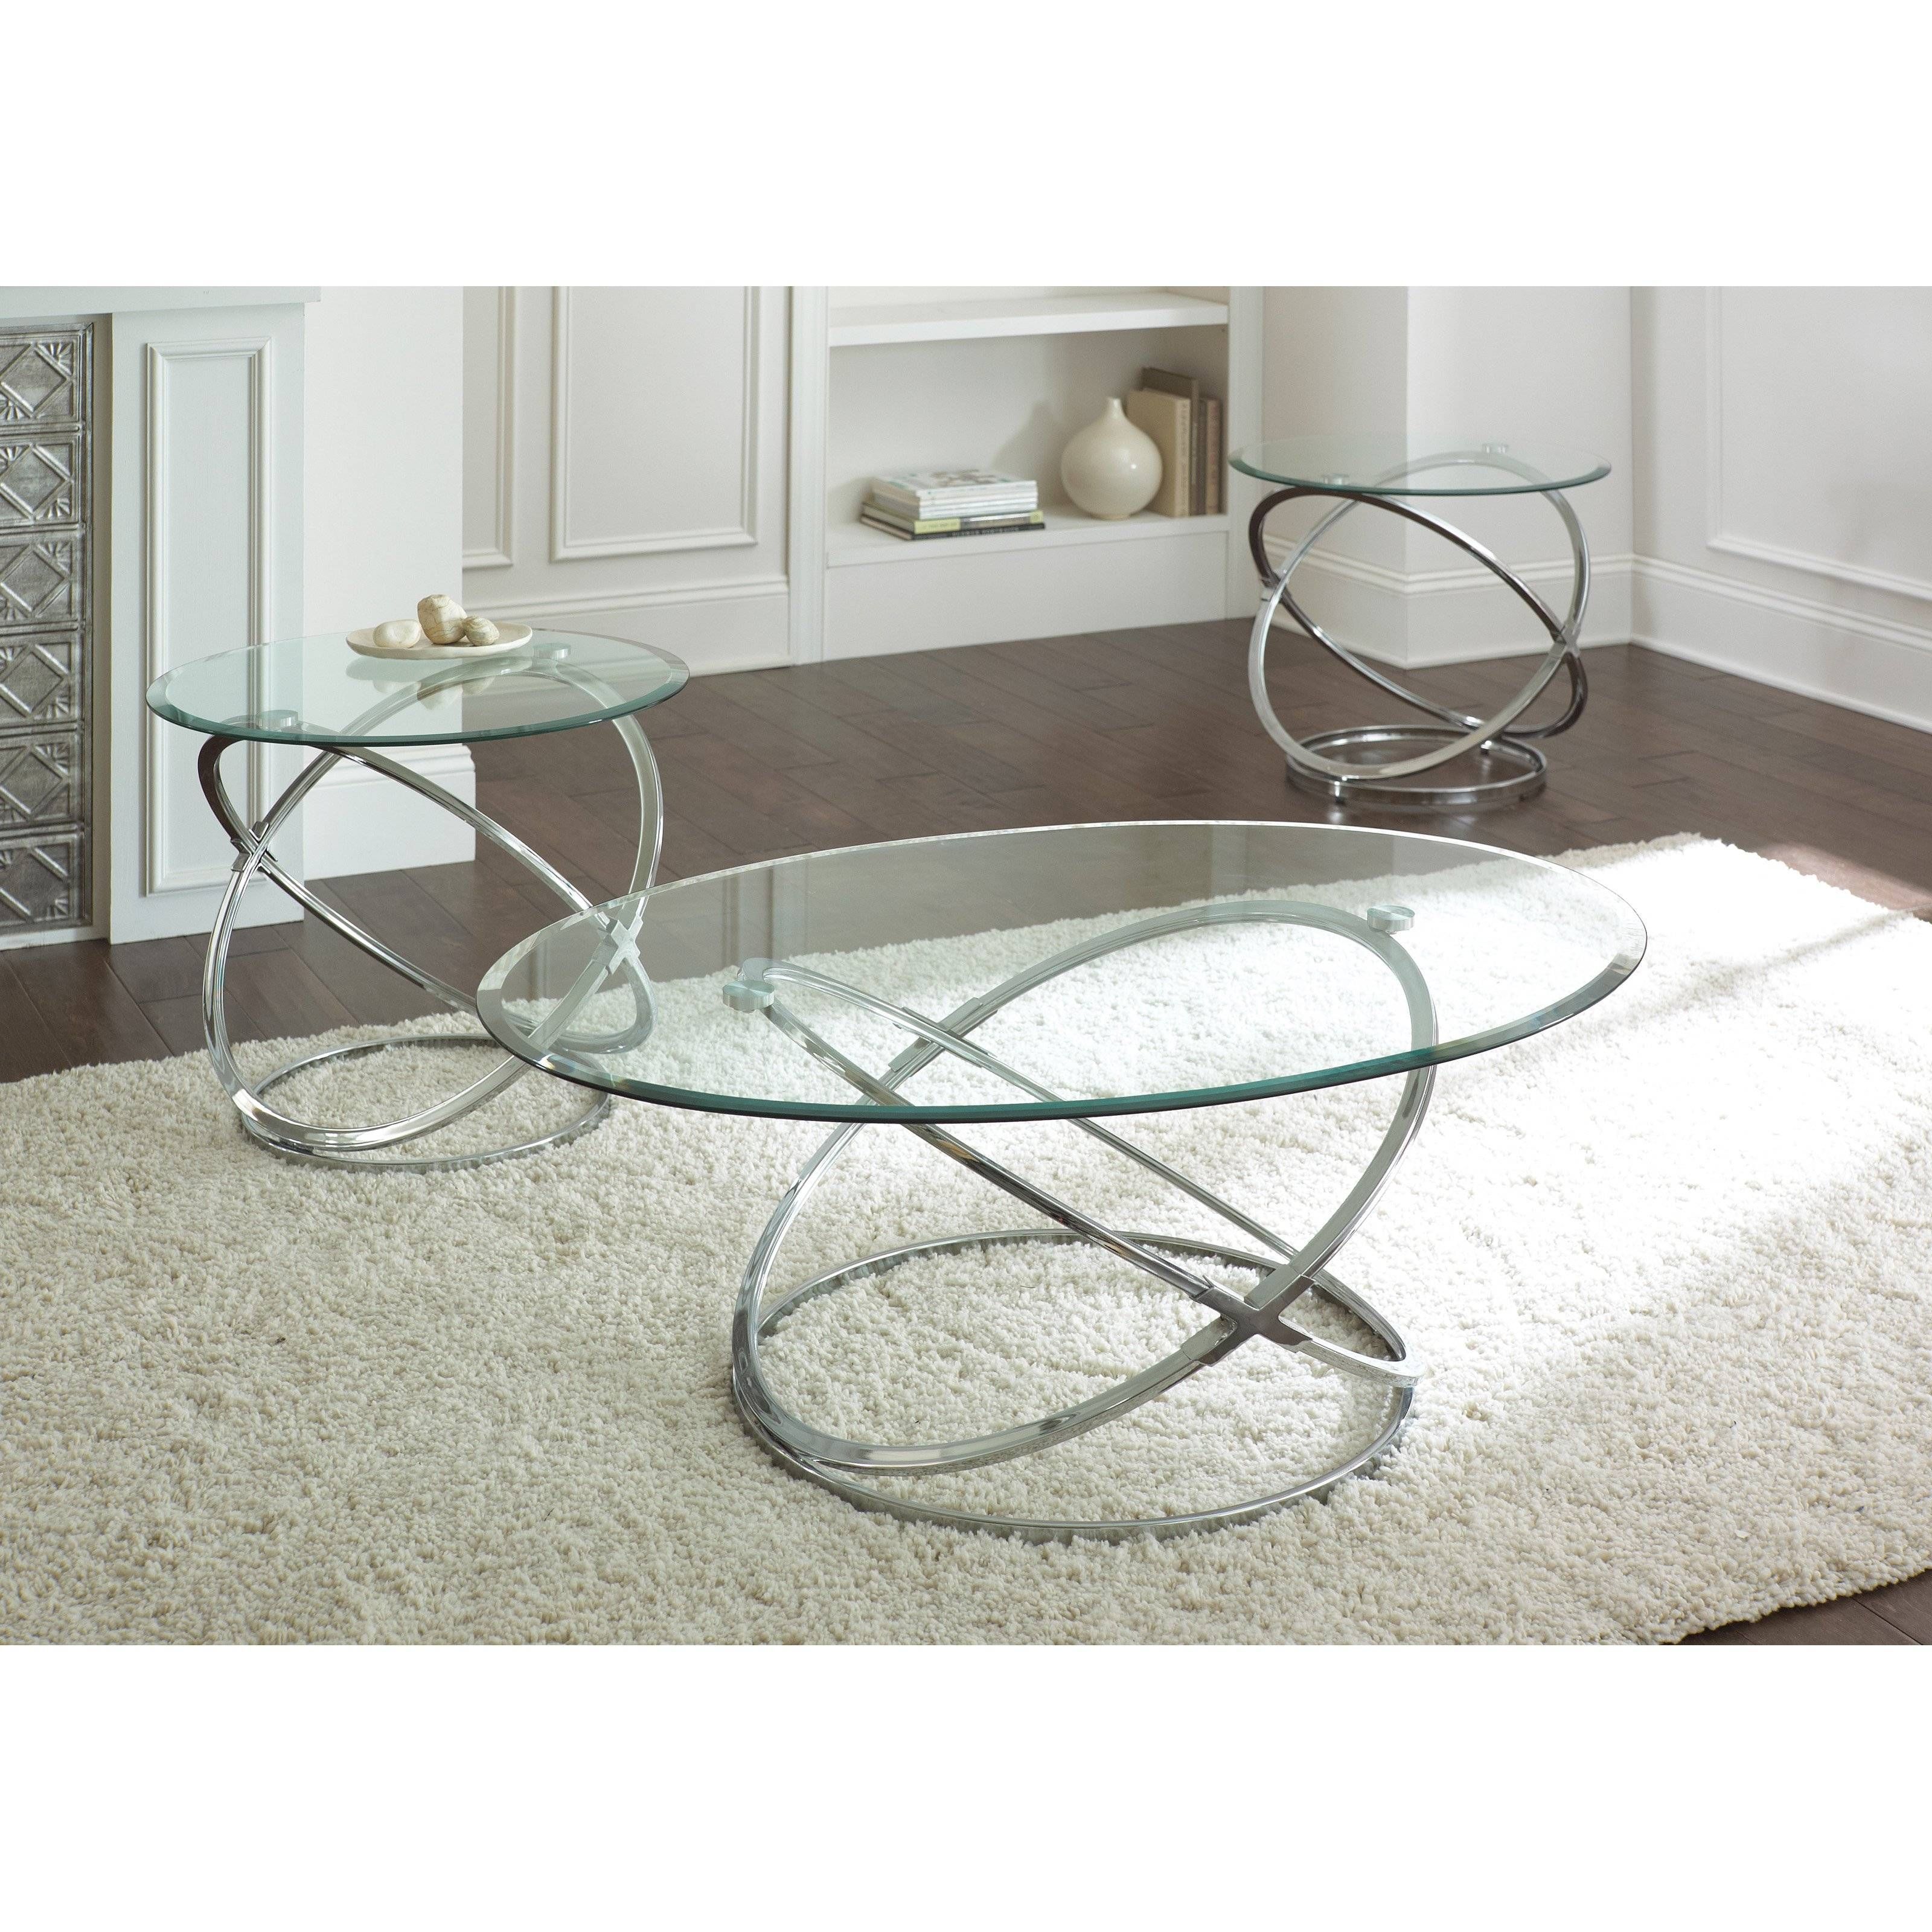 Steve Silver Orion Oval Chrome And Glass Coffee Table Set With Regard To Round Chrome Coffee Tables (View 2 of 30)